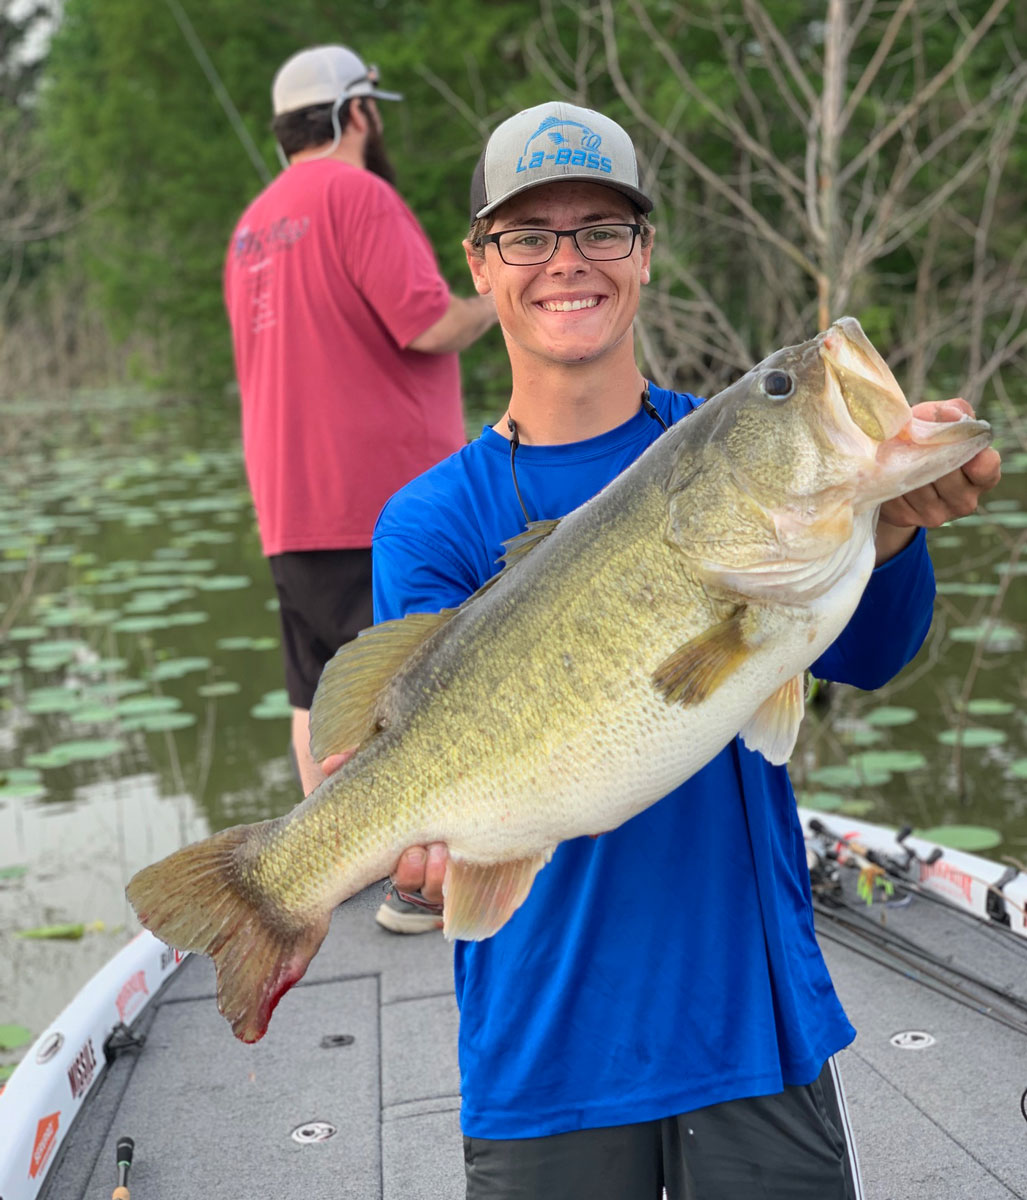 Hunter Hamilton played hooky from school on May 2 and ended up catching this 12.63-pound bass at Bussey Brake.